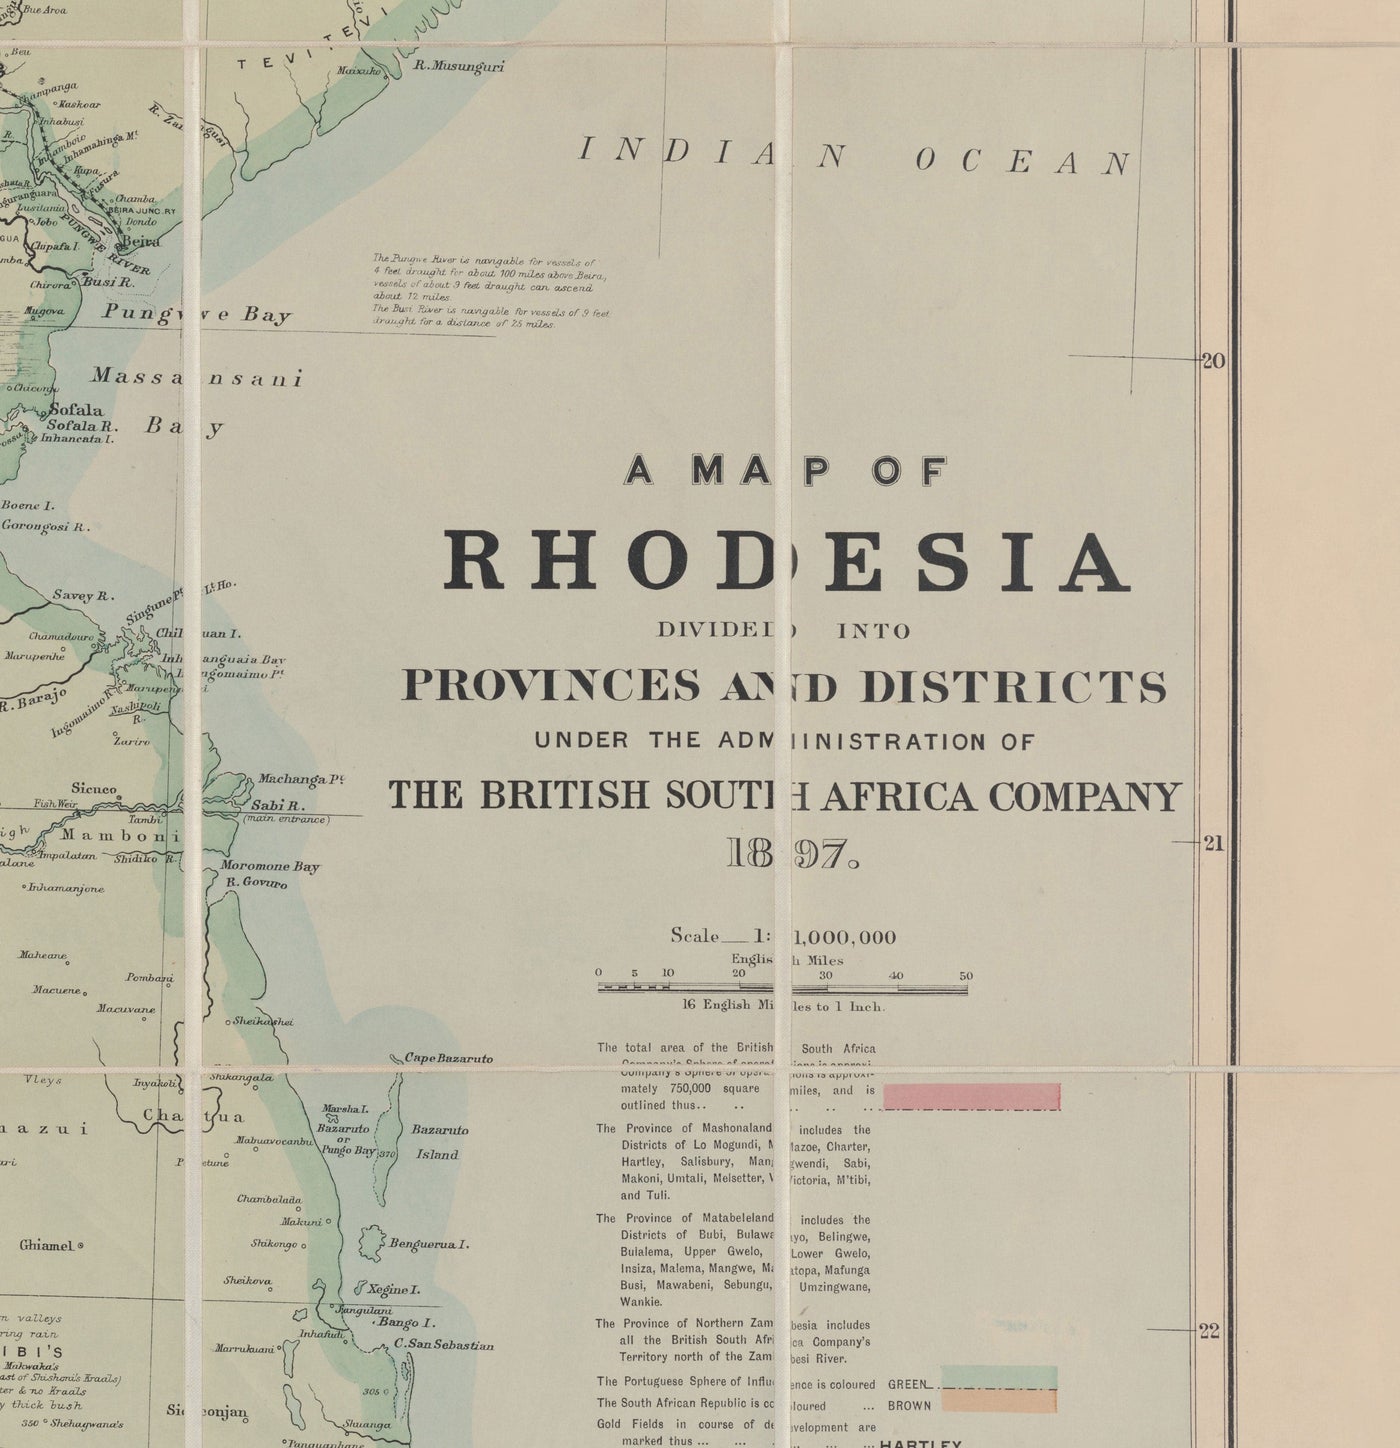 Old Map of Colonial Rhodesia, 1897 by Edward Stanford - Zimbabwe, Mozambique, South Africa, Harare